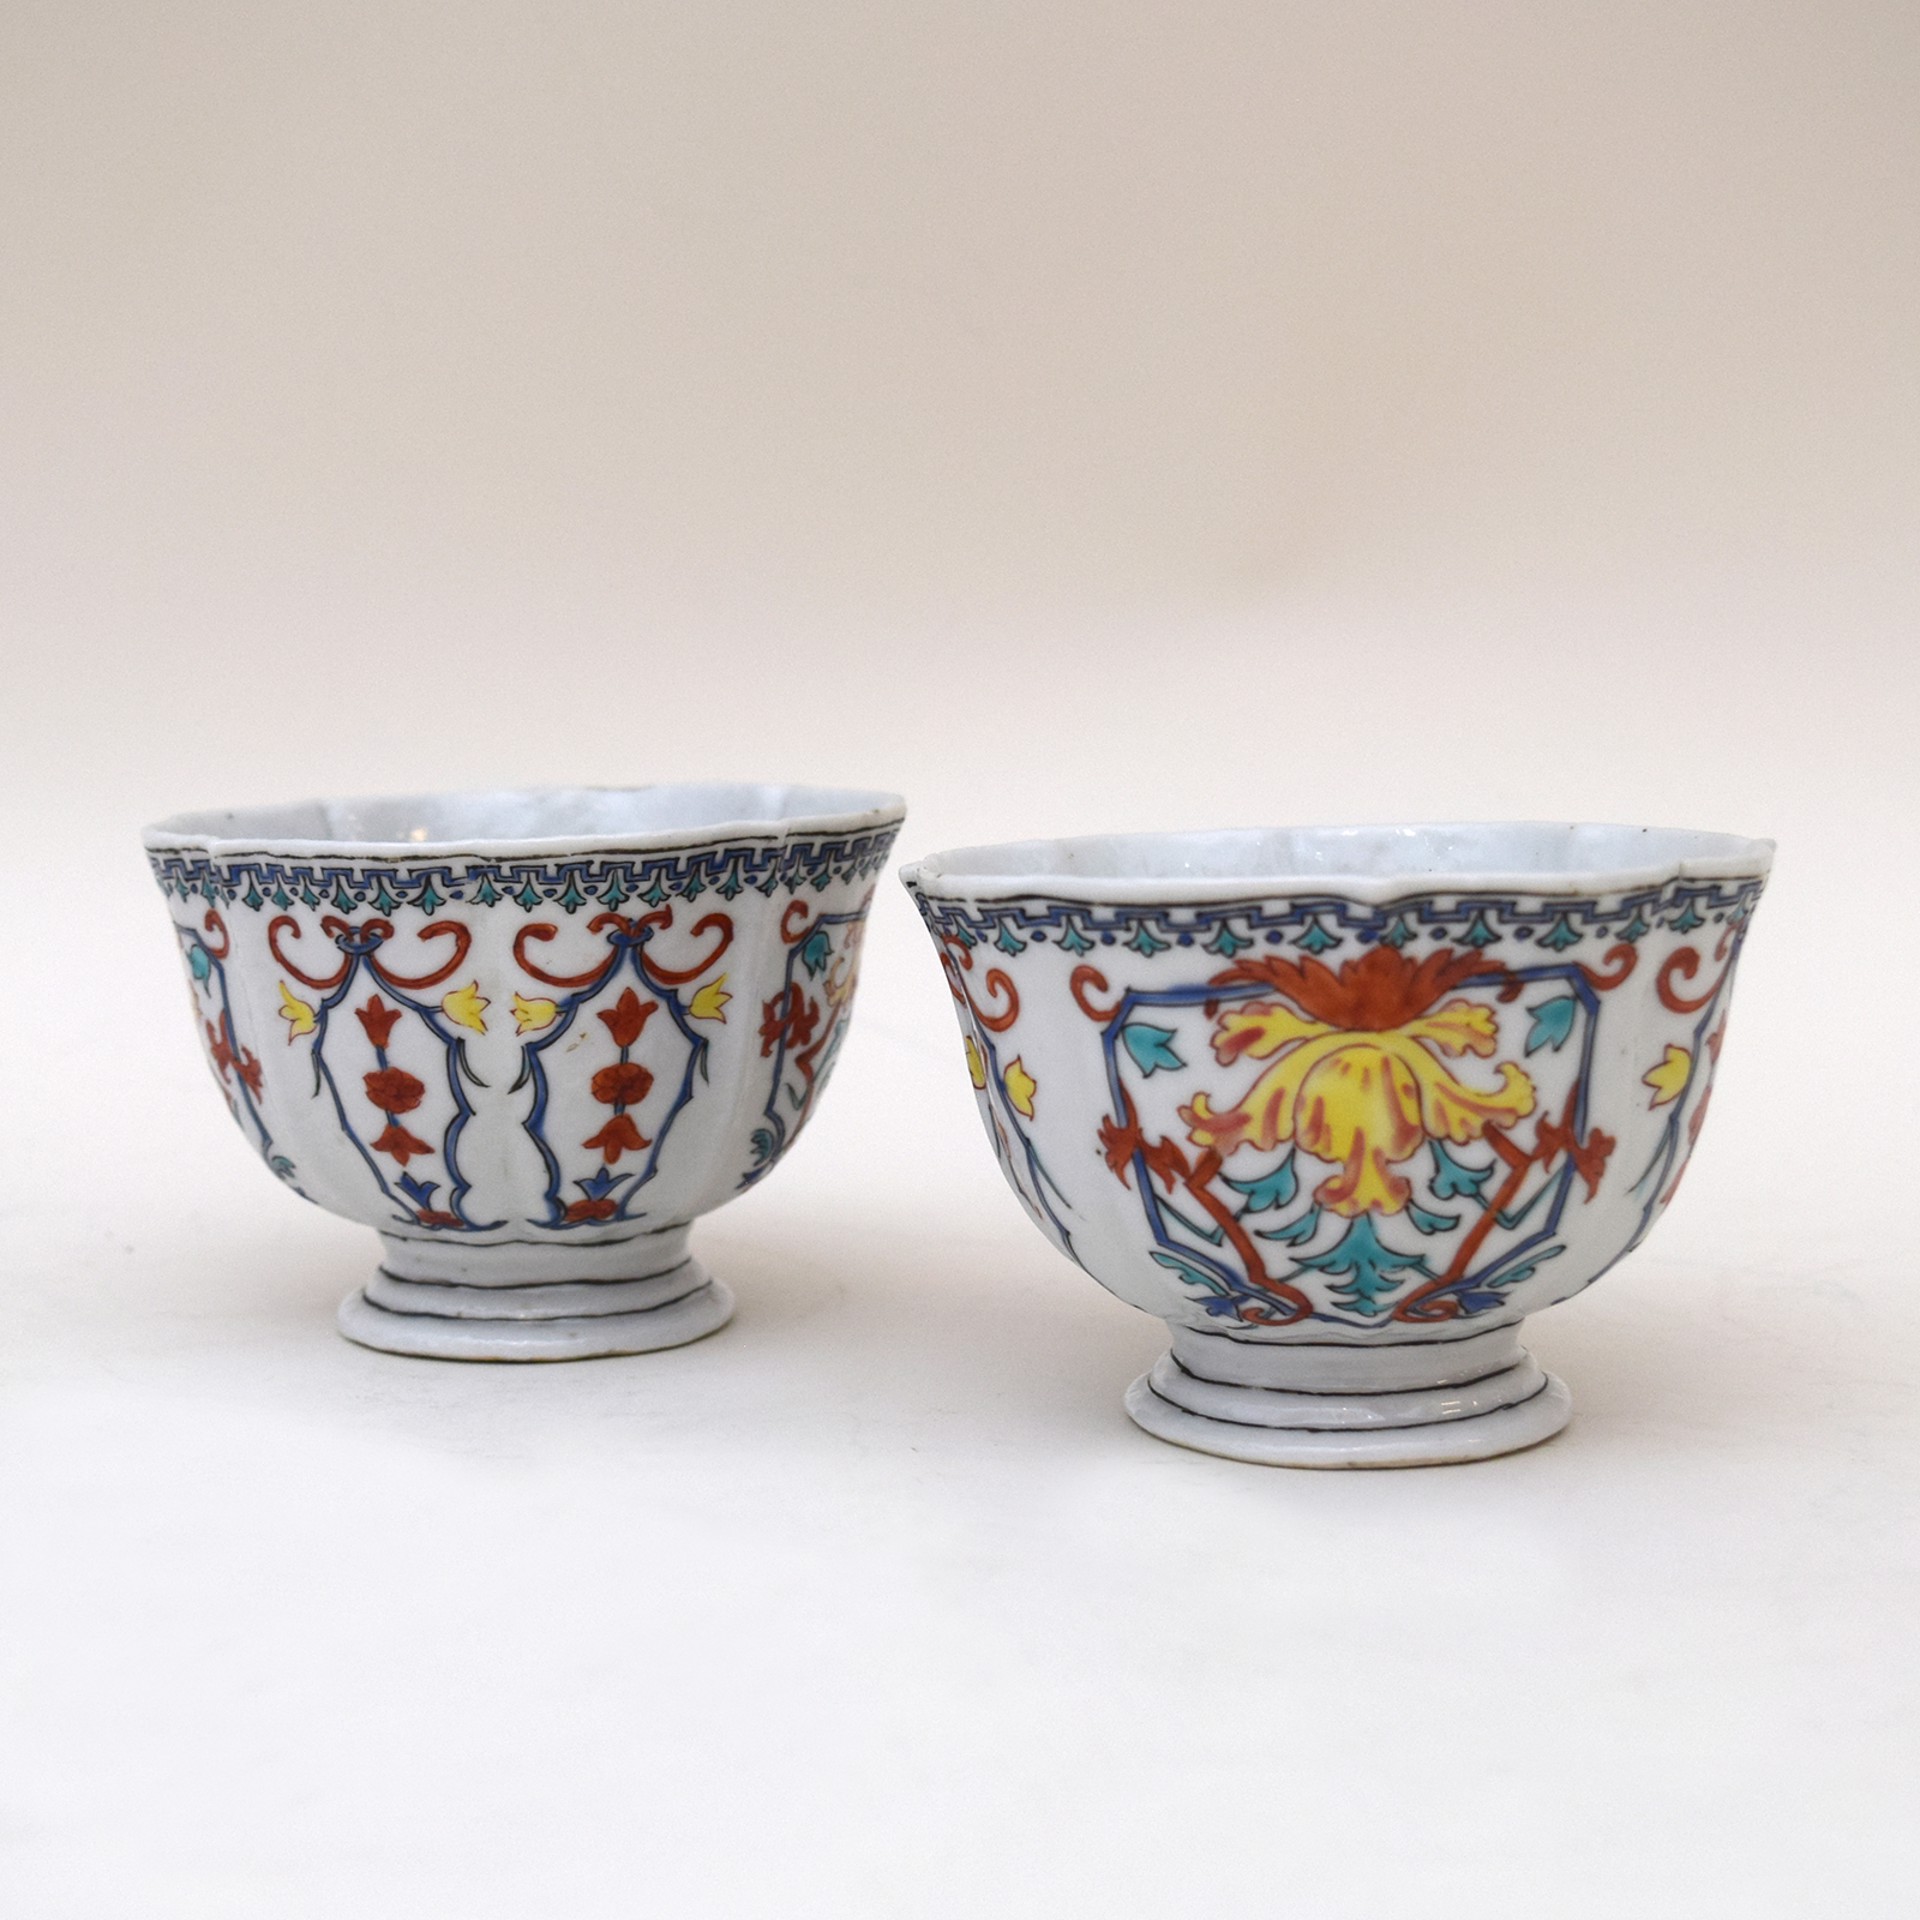 PAIR OF POLYCHROME FOOTED BOWLS AFTER VEZZI